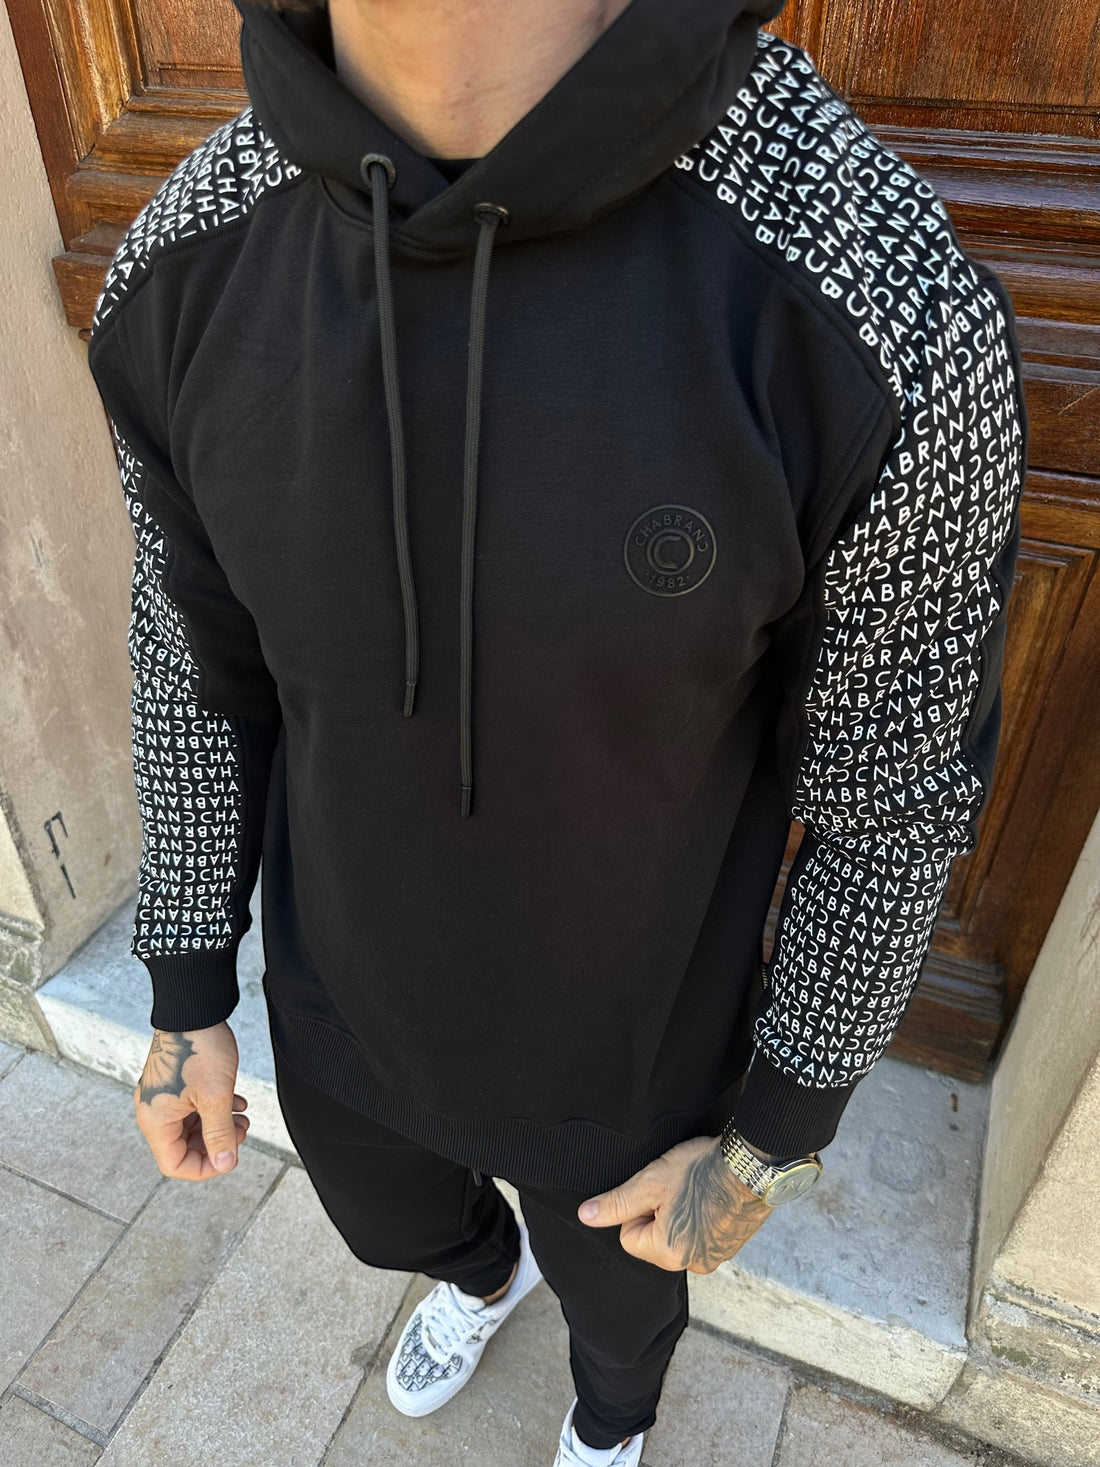 CHABRAND - Black hooded sweatshirt with white mosaic sign